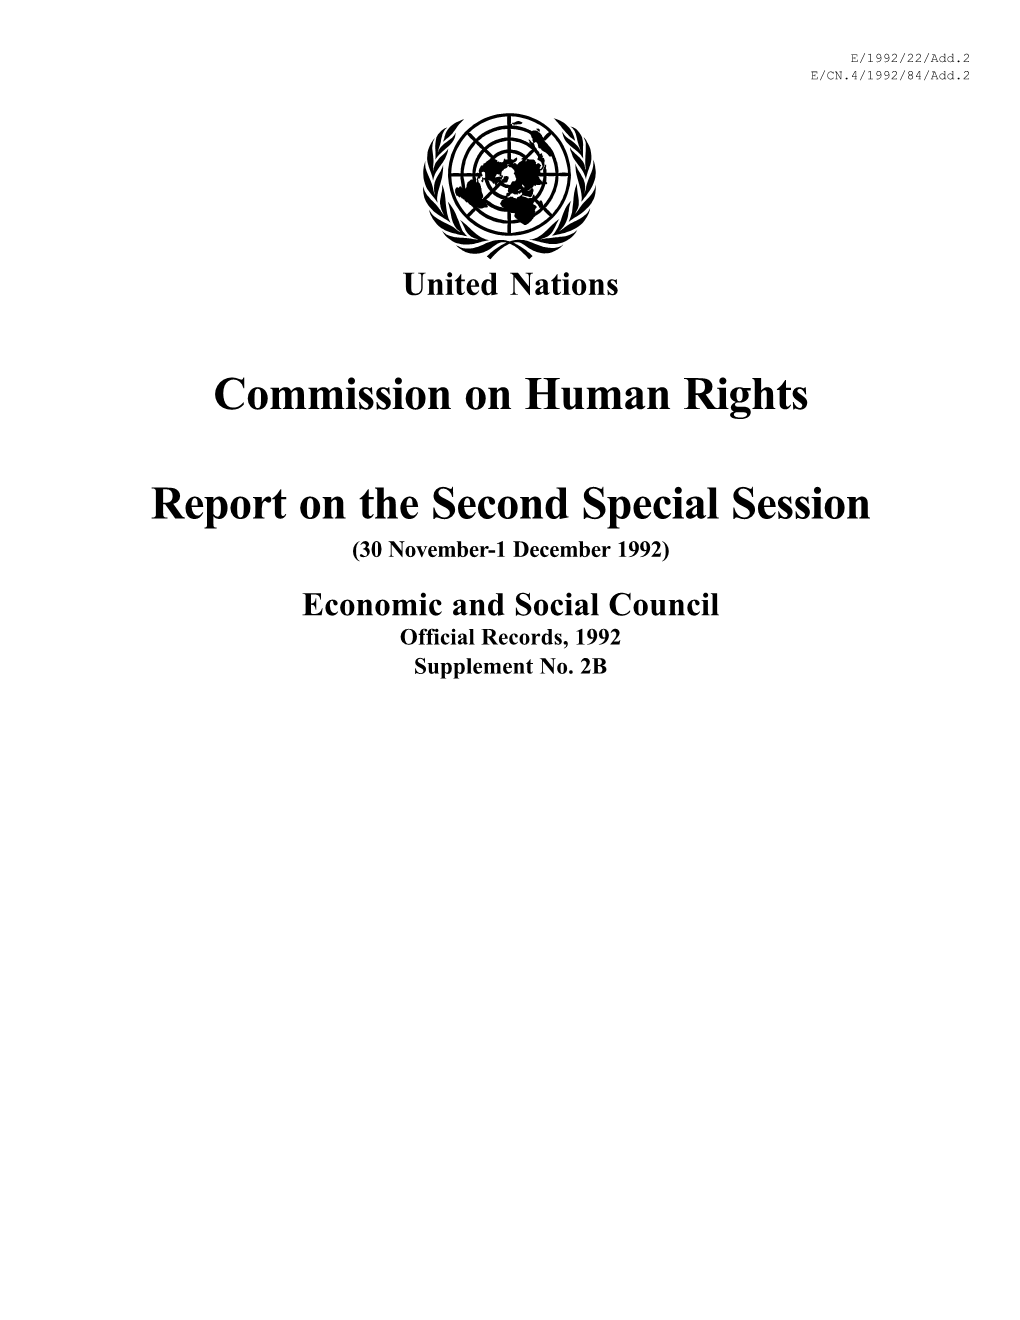 Commission on Human Rights Report on the Second Special Session